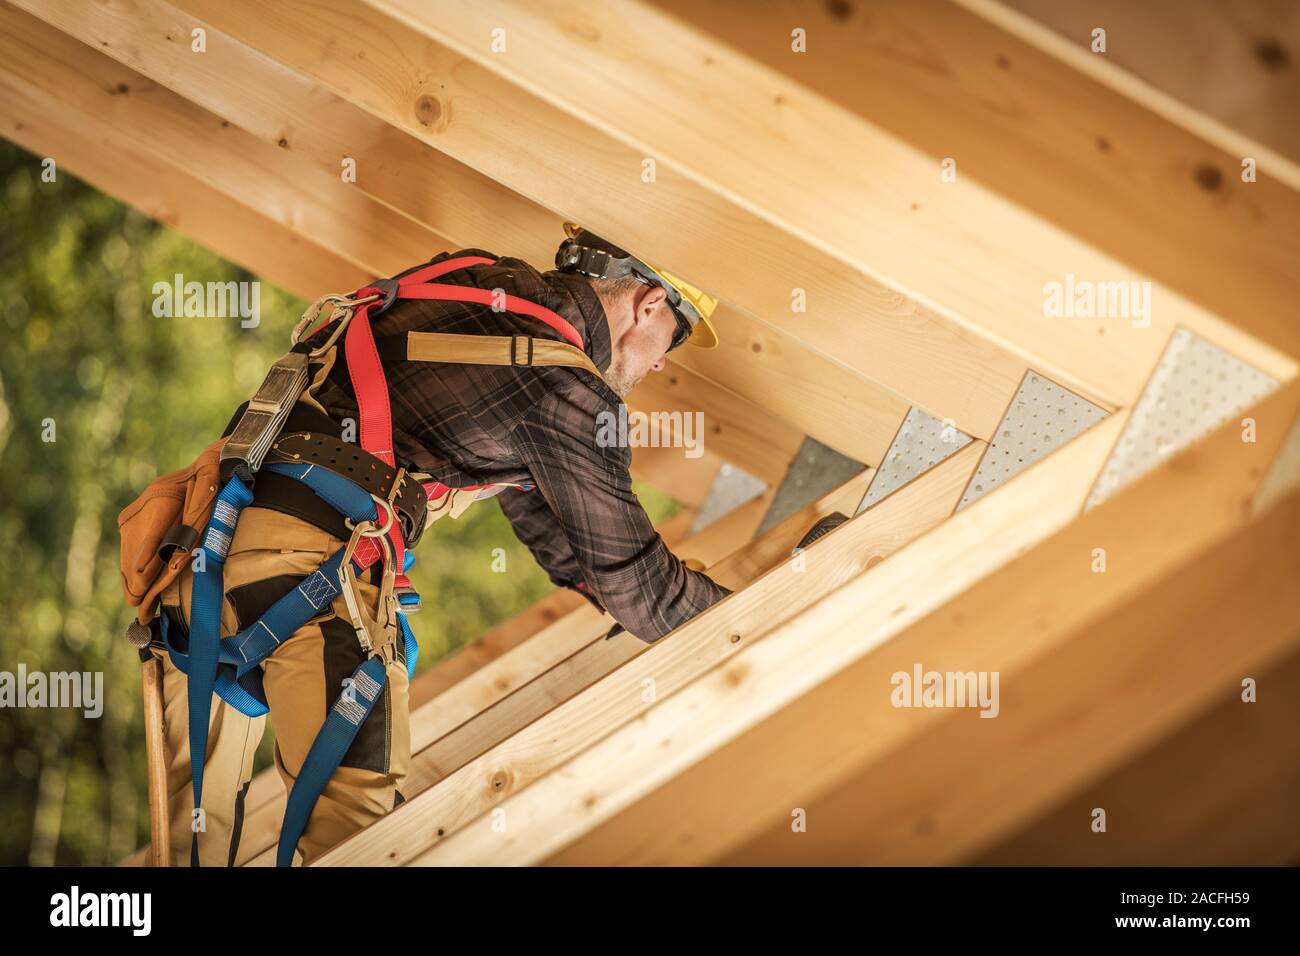 Wooden Roof Frame Construction Work. Caucasian Worker Finishing Wooden Skeleton Frame.Construction Industry. Stock Photo